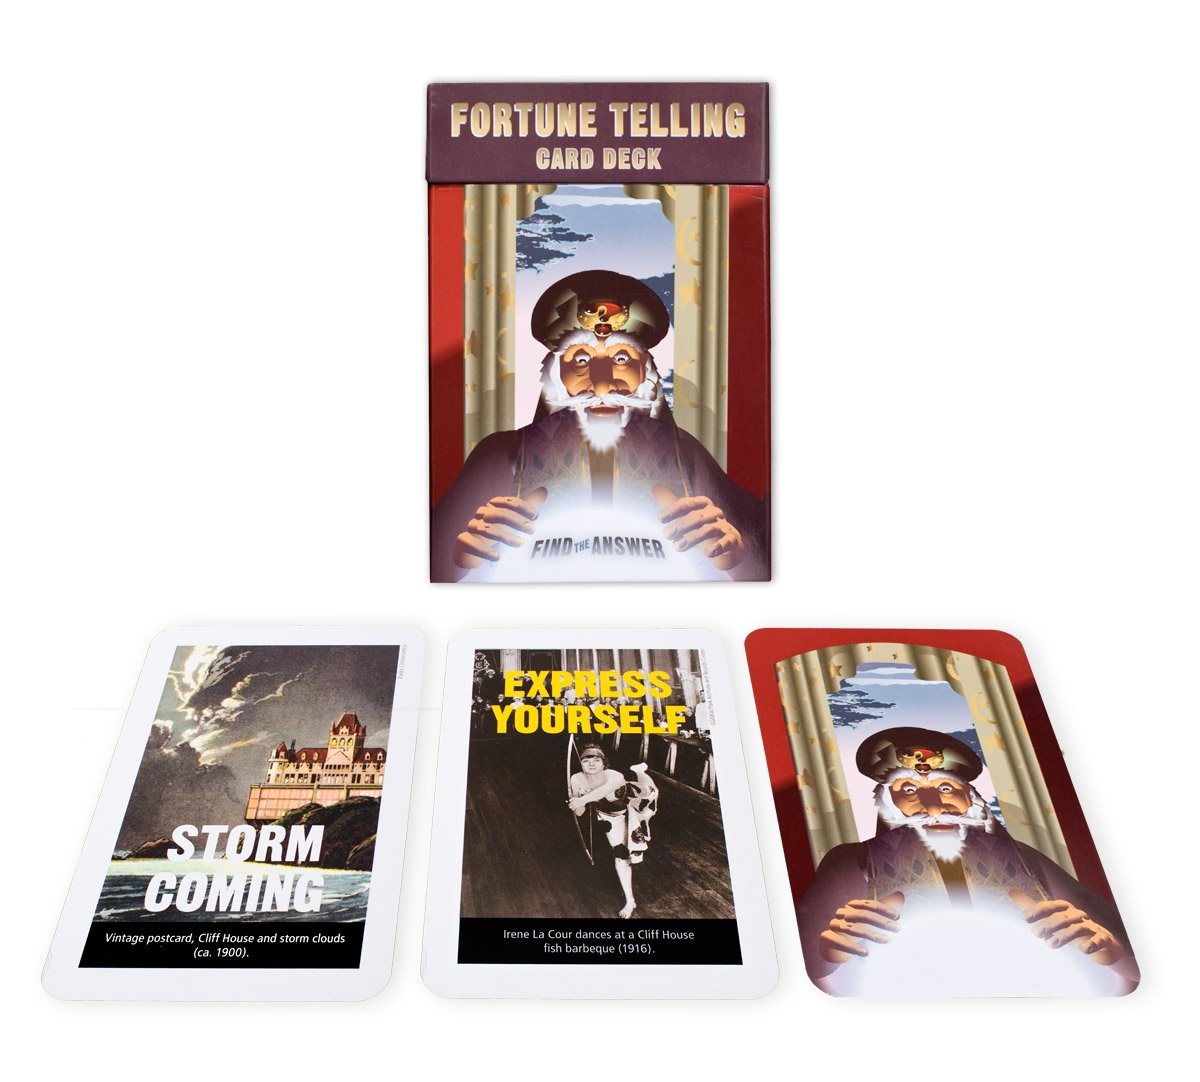 Boxed set of Lands End fortune-telling cards, inspired by old attractions at popular oceanside Sutro Baths and Merrie Way.